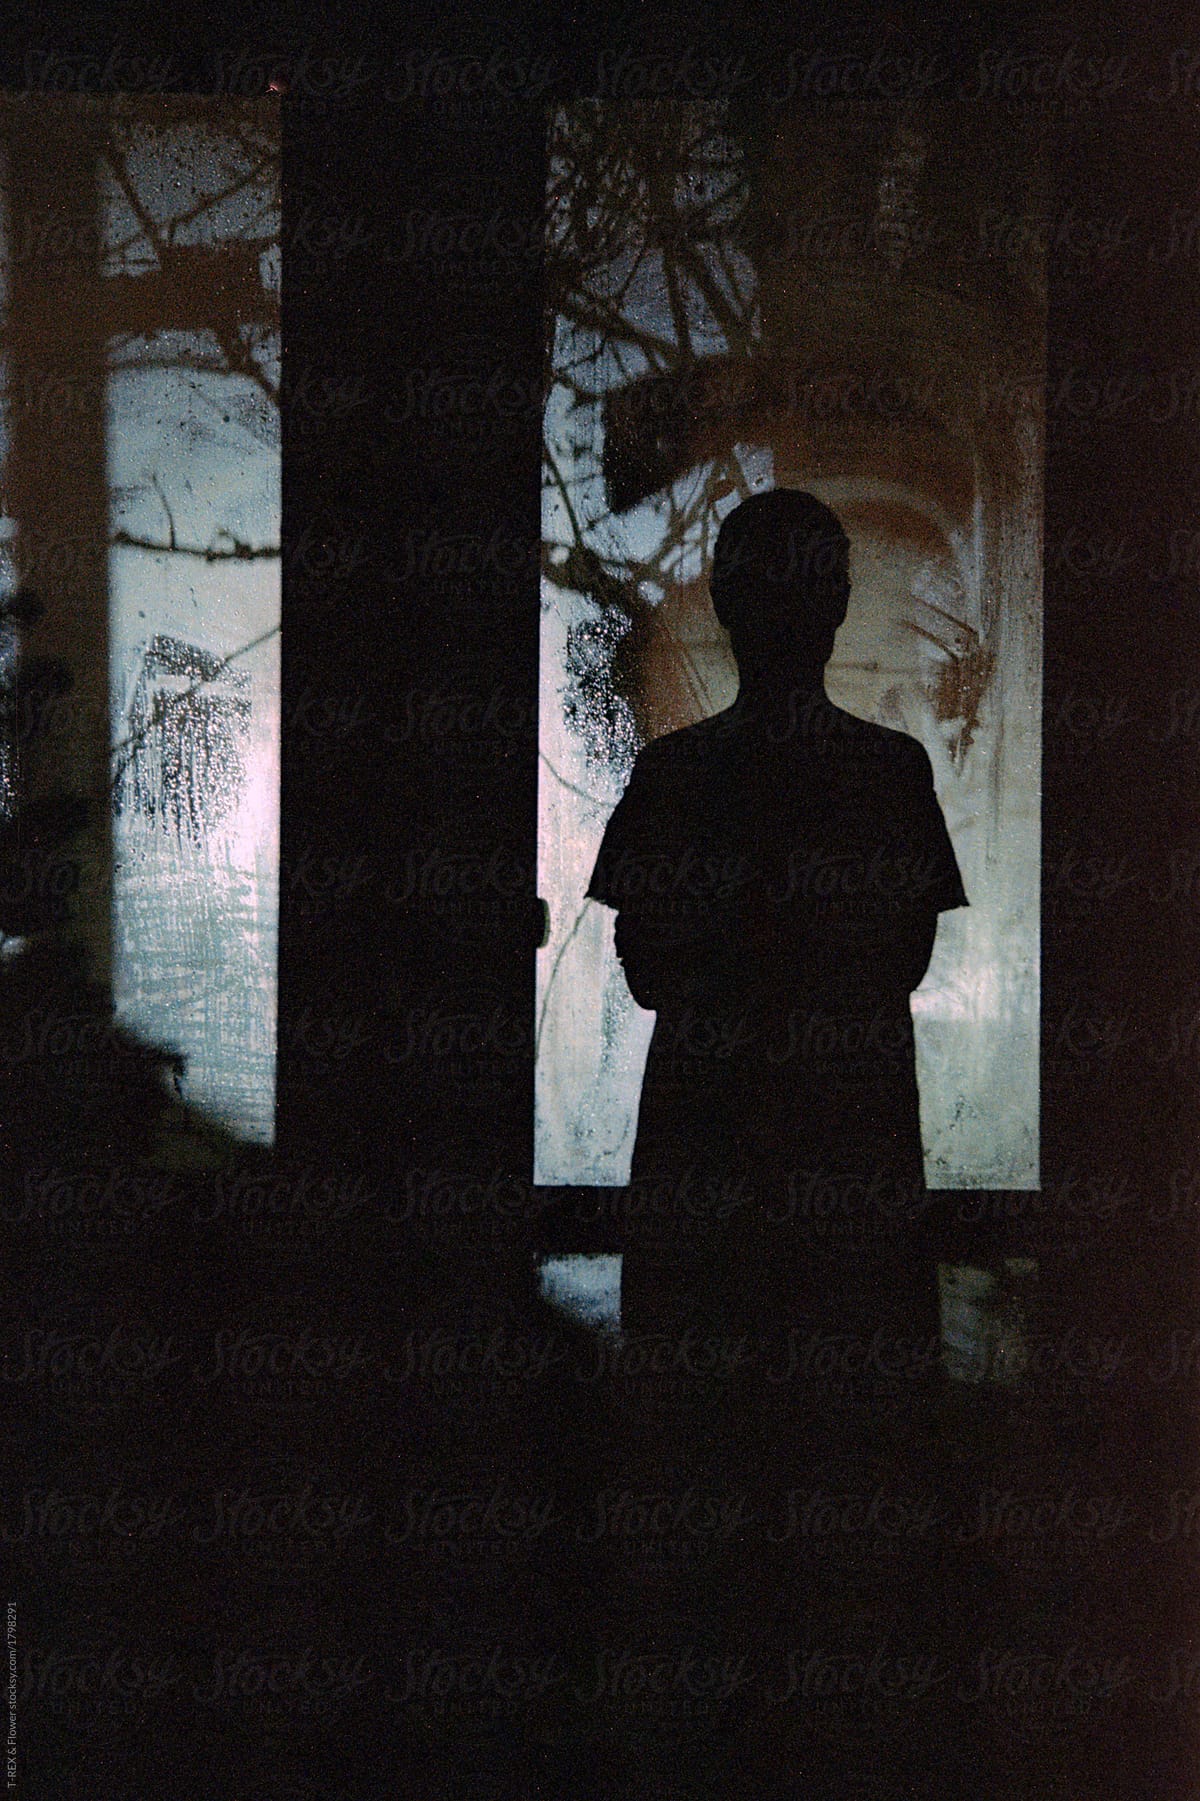 Silhouette Of Man Against Window by Stocksy Contributor